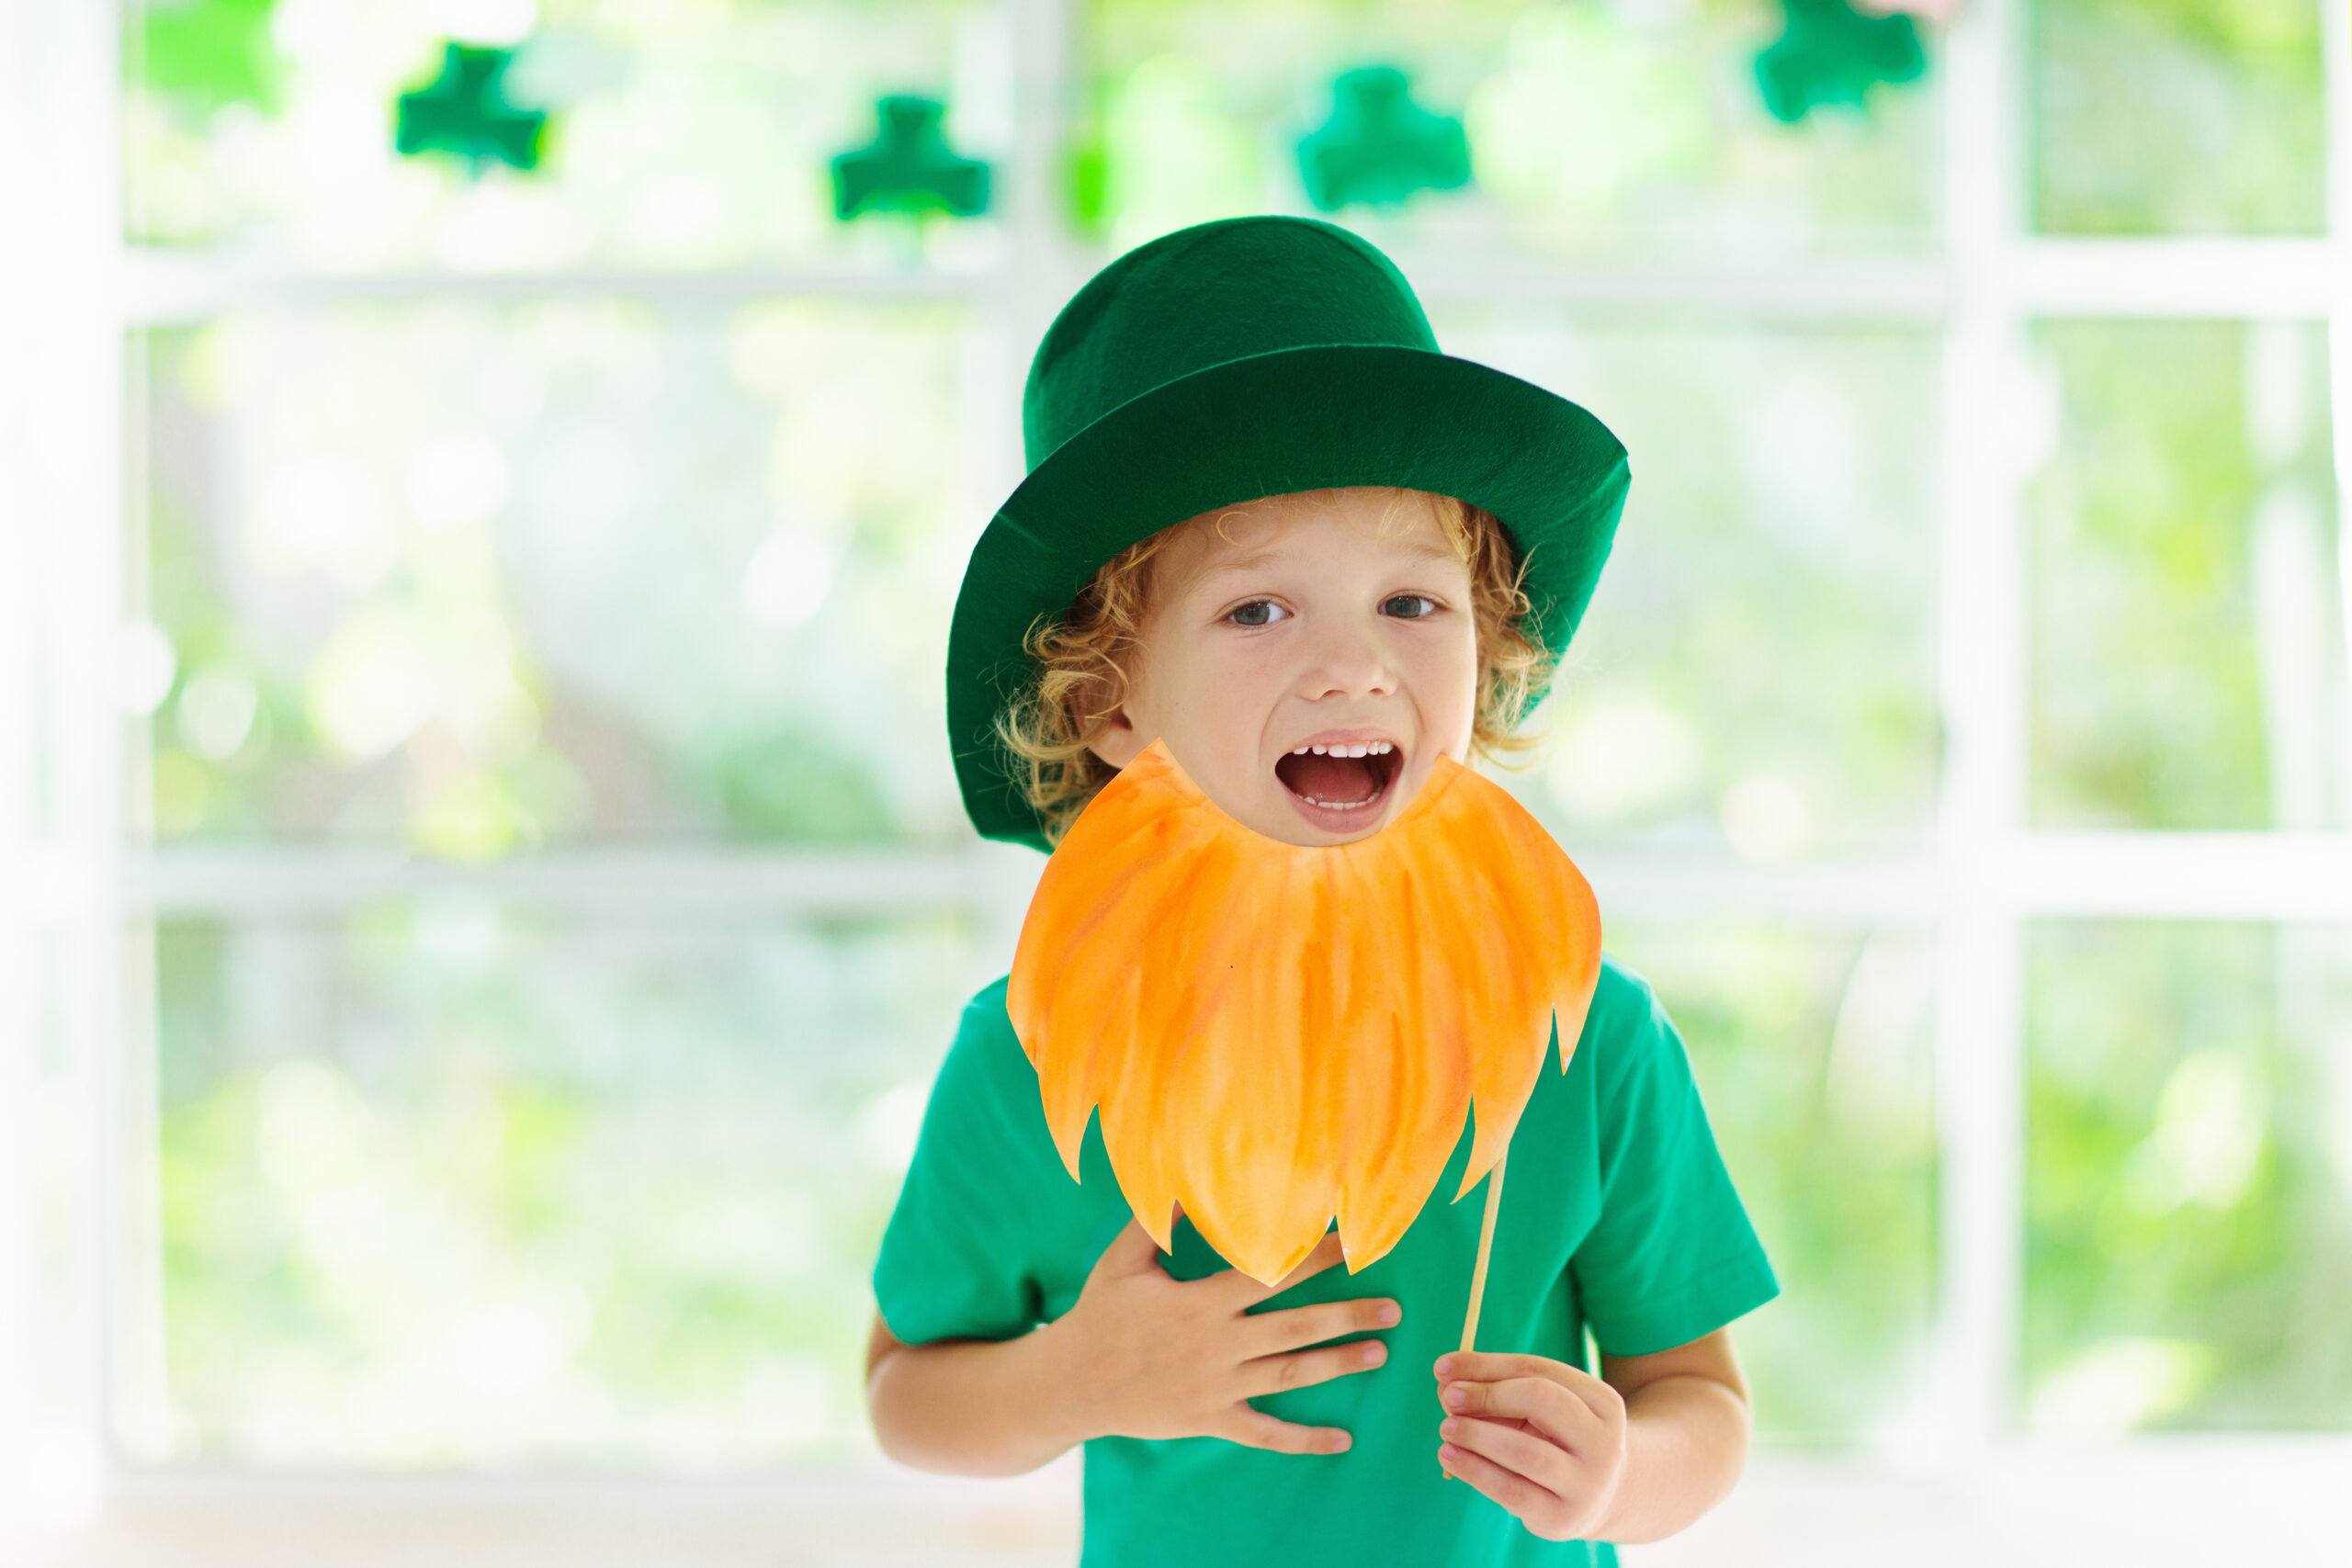 A DAY OF GREEN DELIGHT FOR KIDS: CELEBRATING ST. PATRICK’S DAY